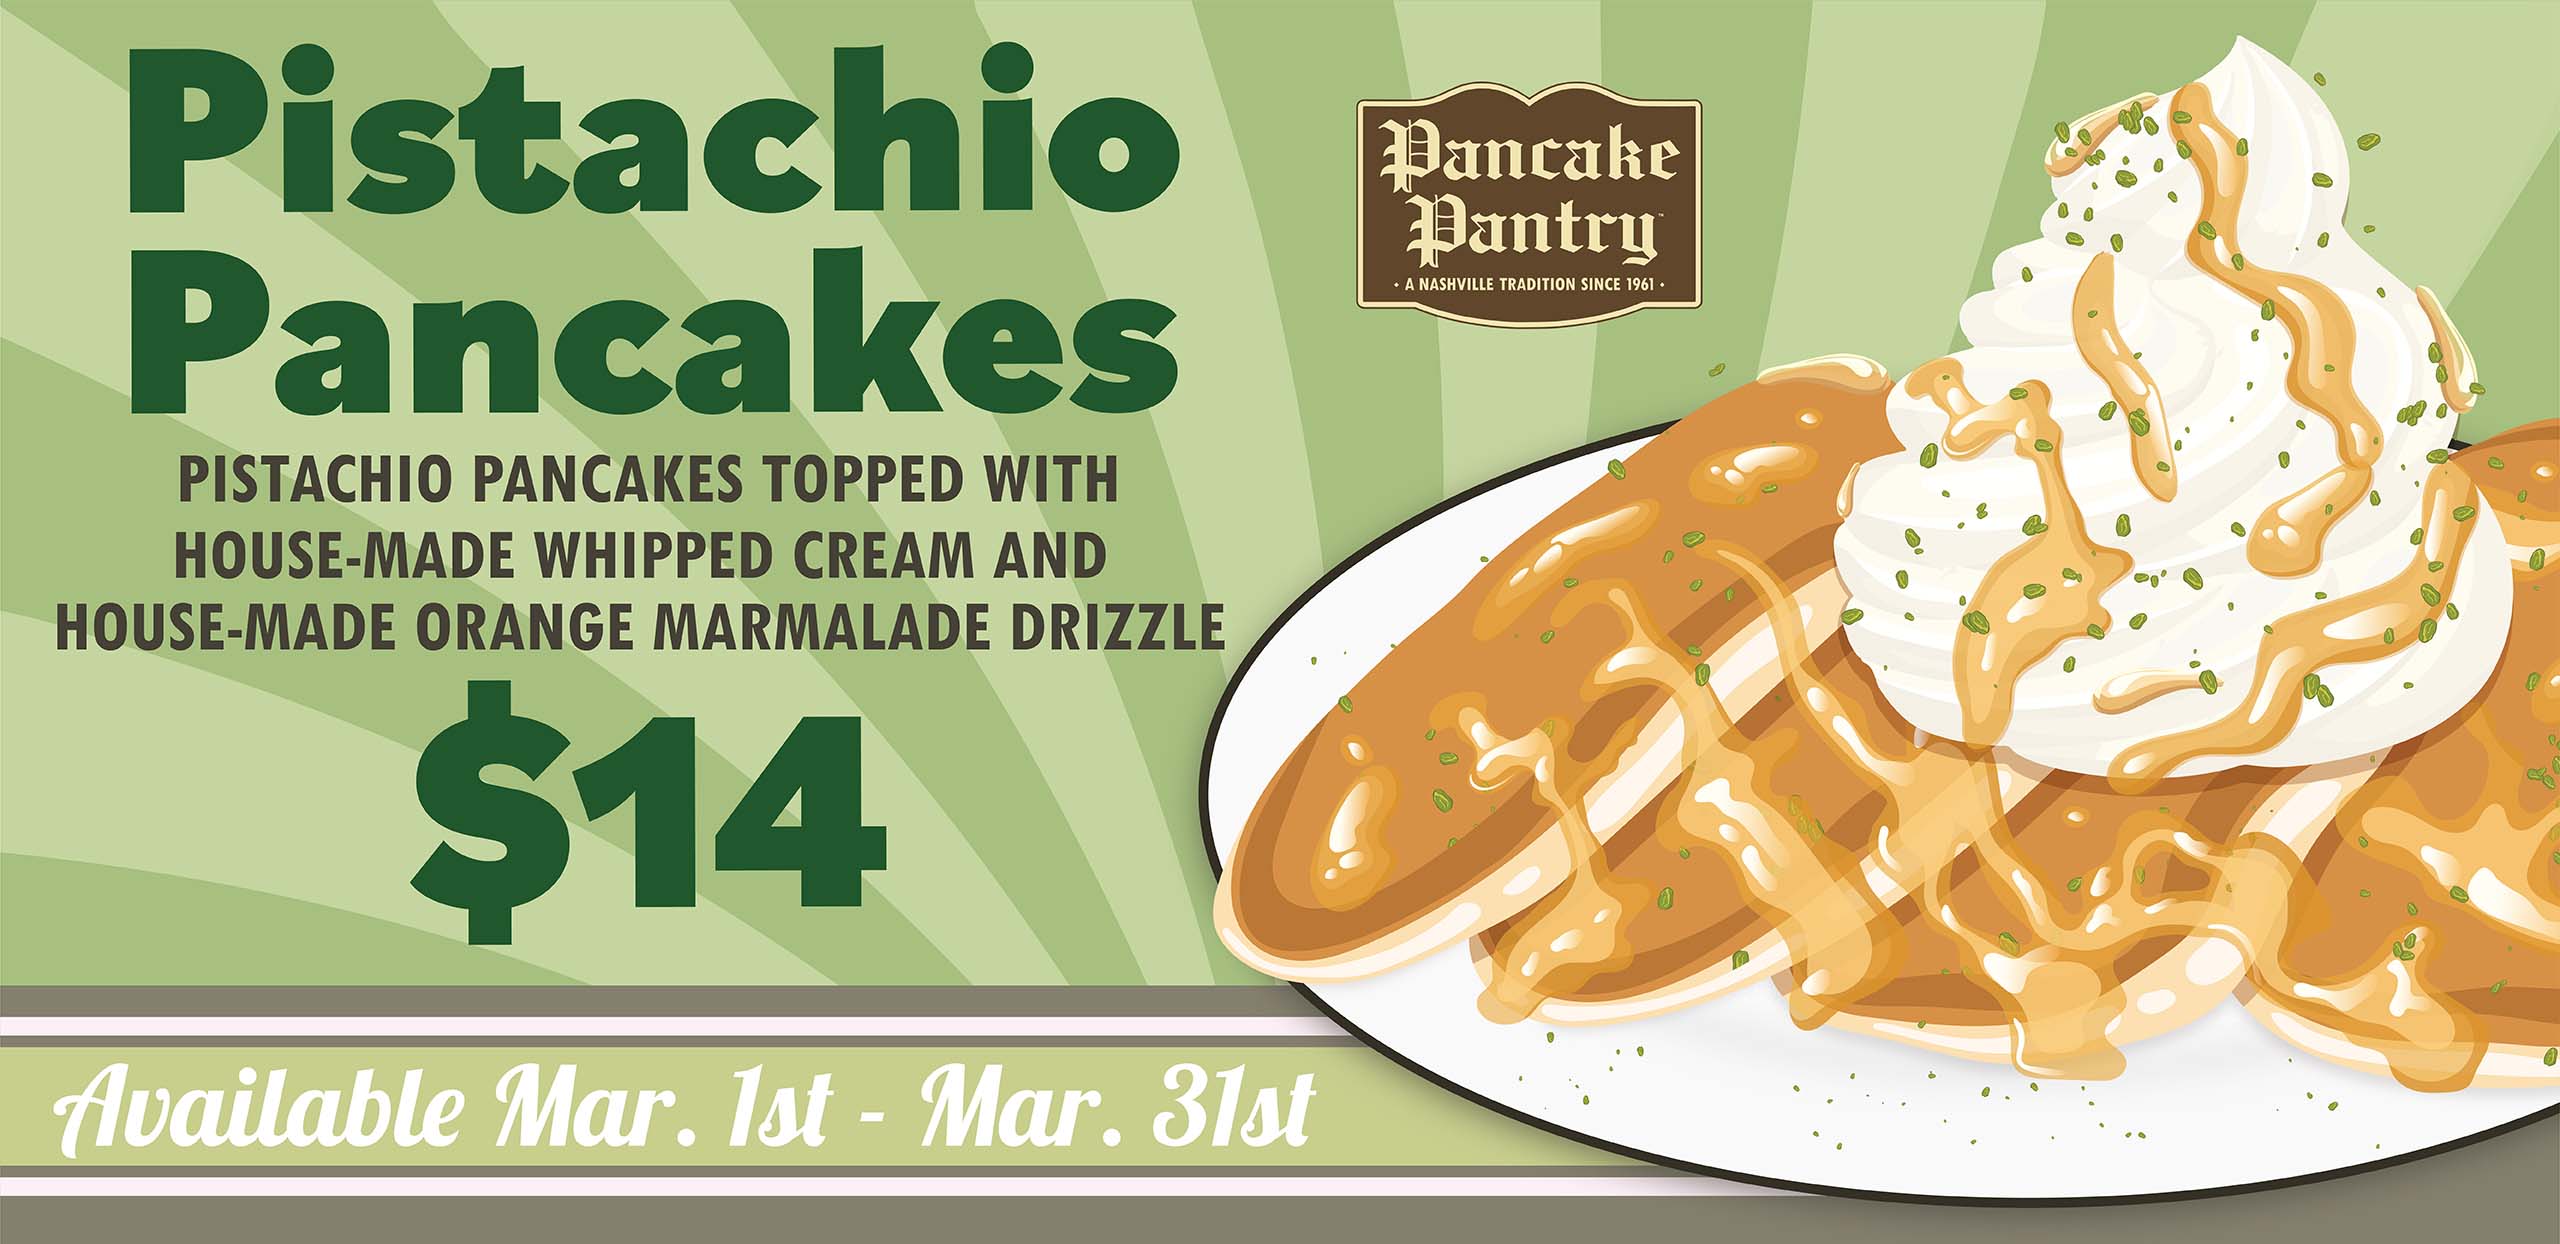 Pancake Pantry Pistachio Pancakes for Breakfast in March